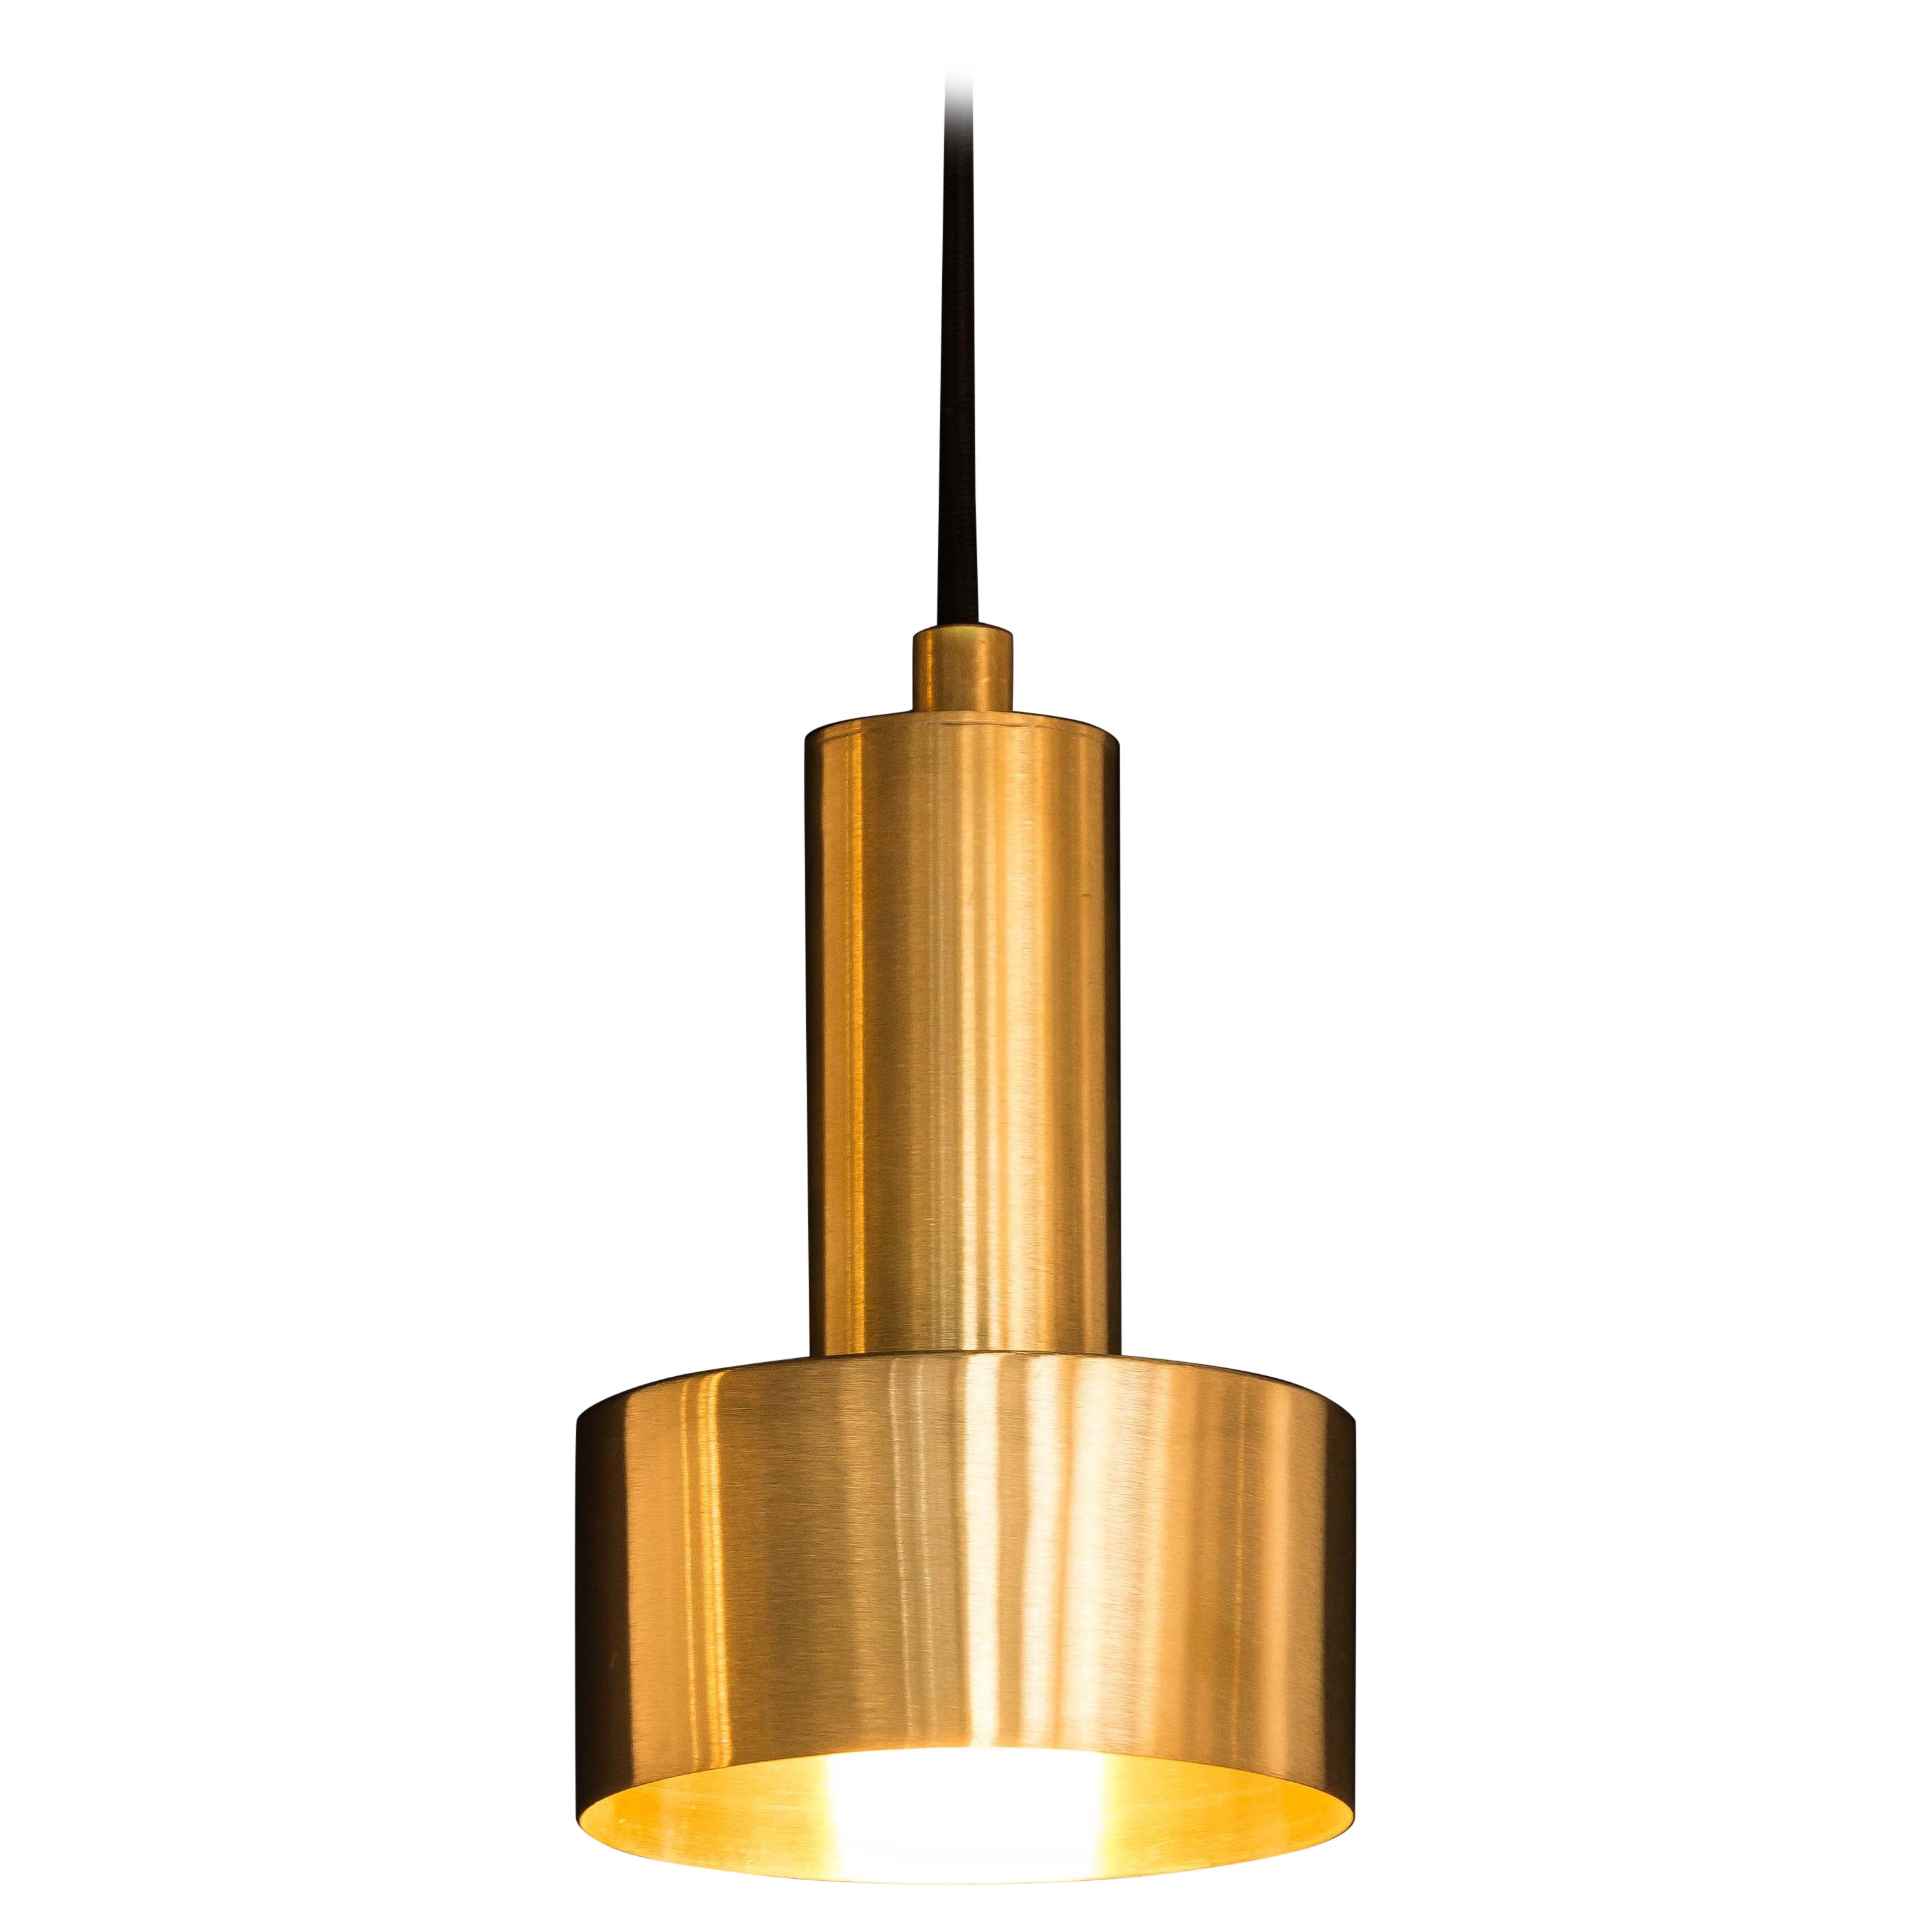 Contemporary-Modern Pendelleuchte aus Naturmessing Handcrafted in Italy by 247lab